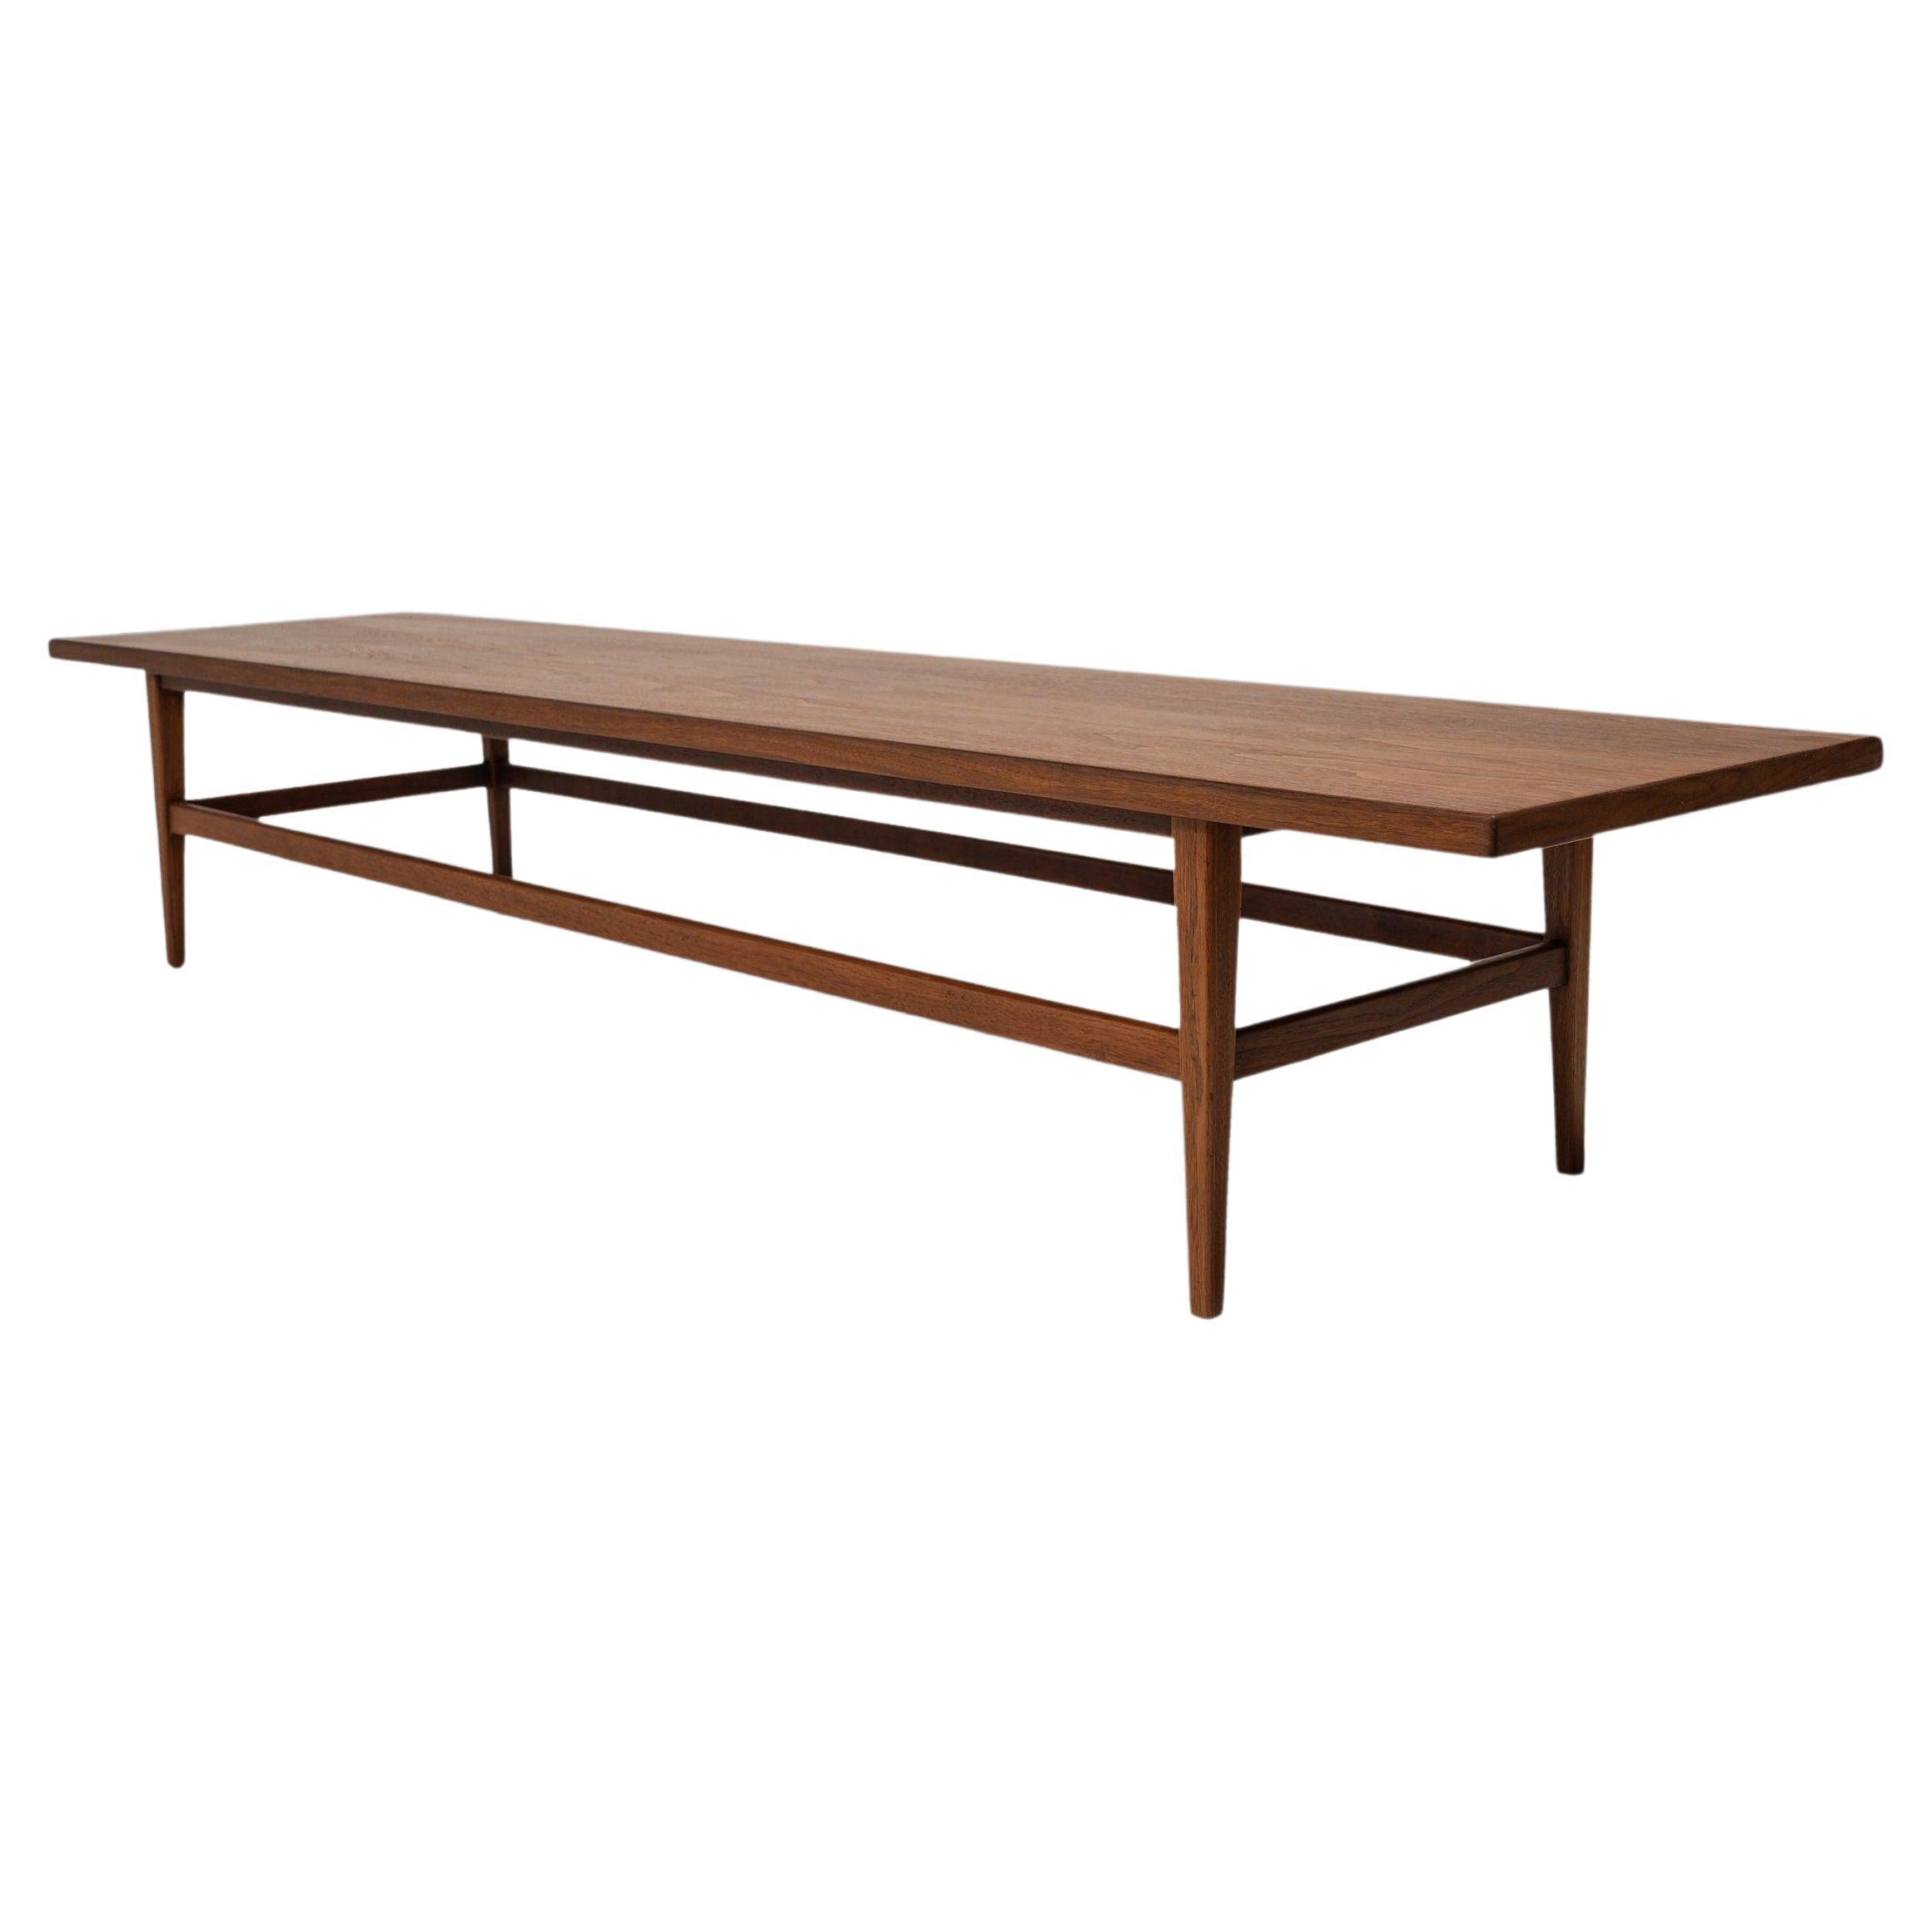 Extra Long Mid-Century Modern Coffee Table / Bench in Walnut, c. 1960's For Sale